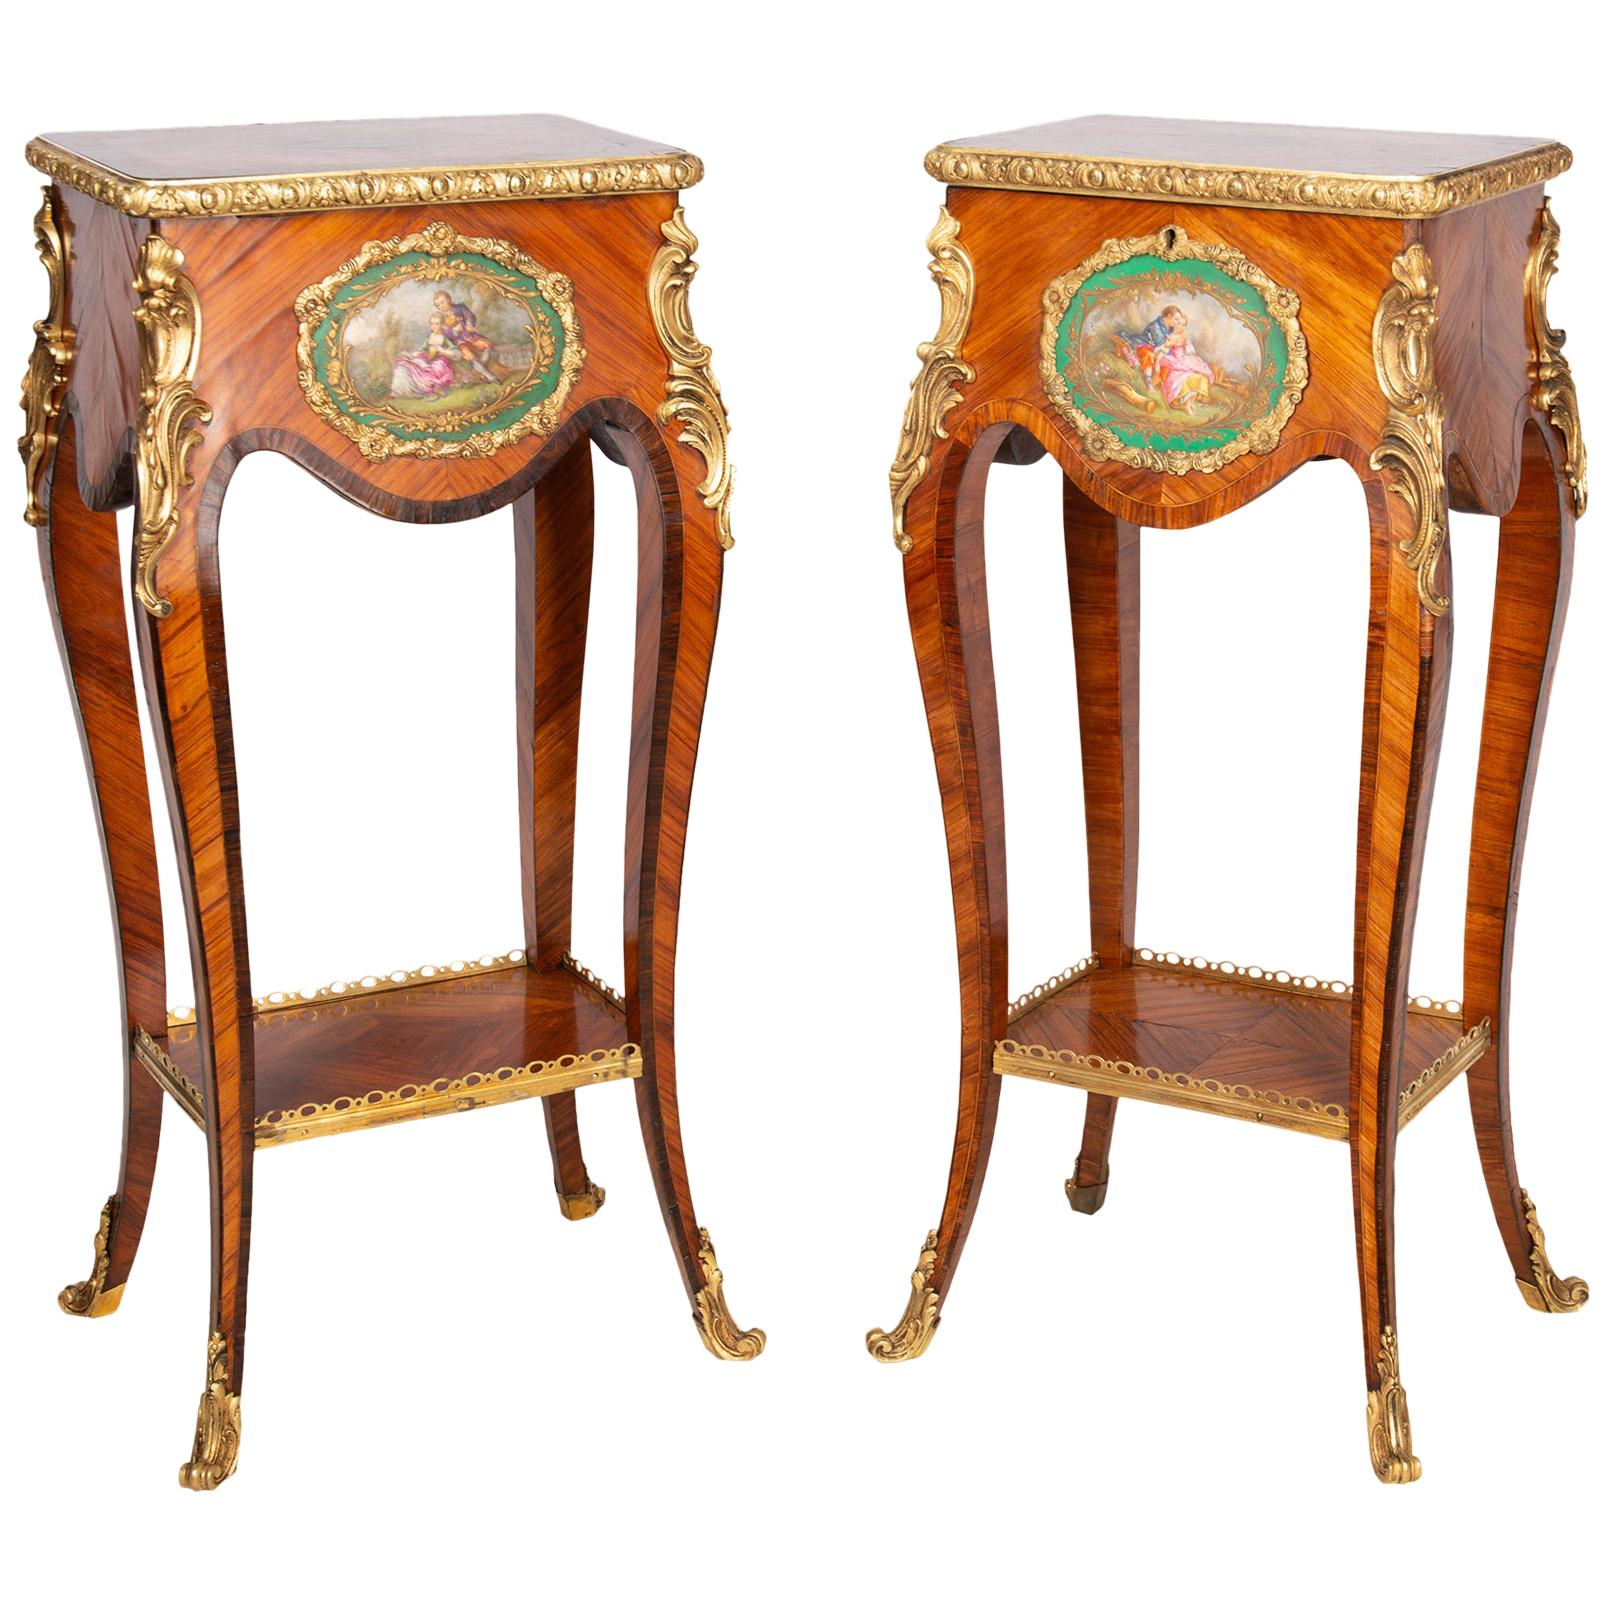 Pair of Louis XVI Style Side Tables with Porcelain Plaques, circa 1890 For Sale